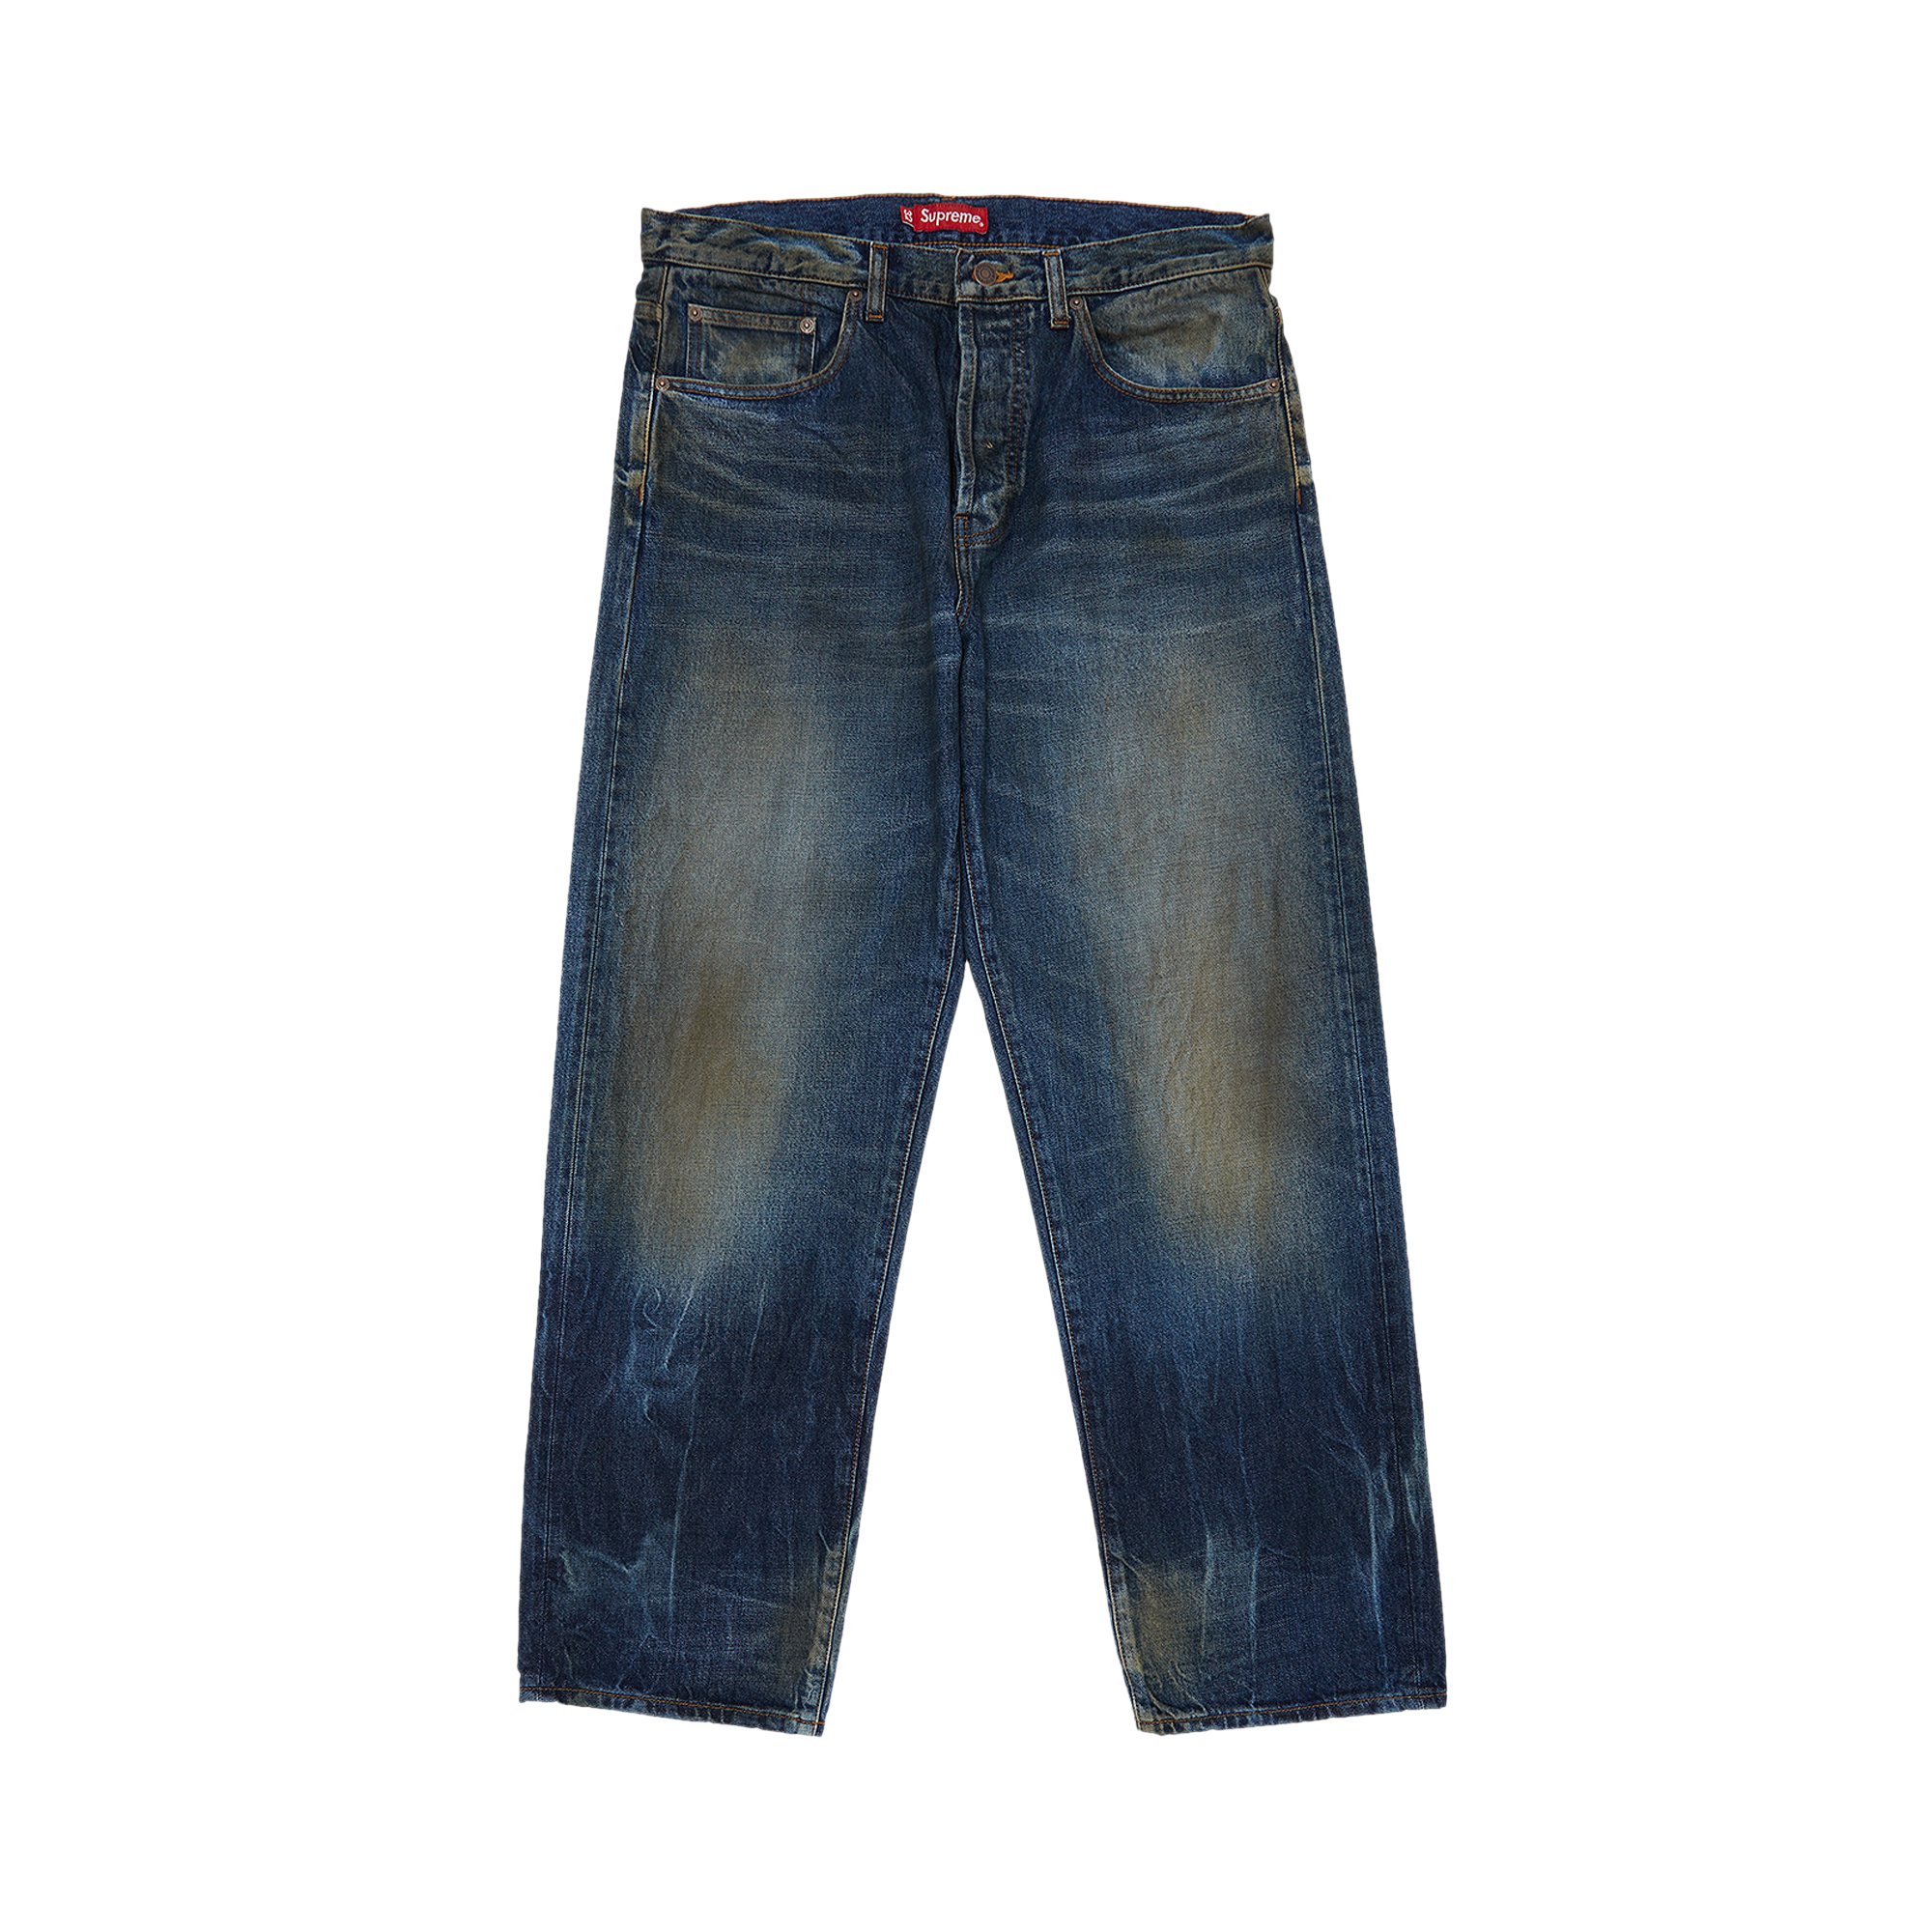 Supreme Distressed Loose Fit Selvedge Jean 'Washed Blue'